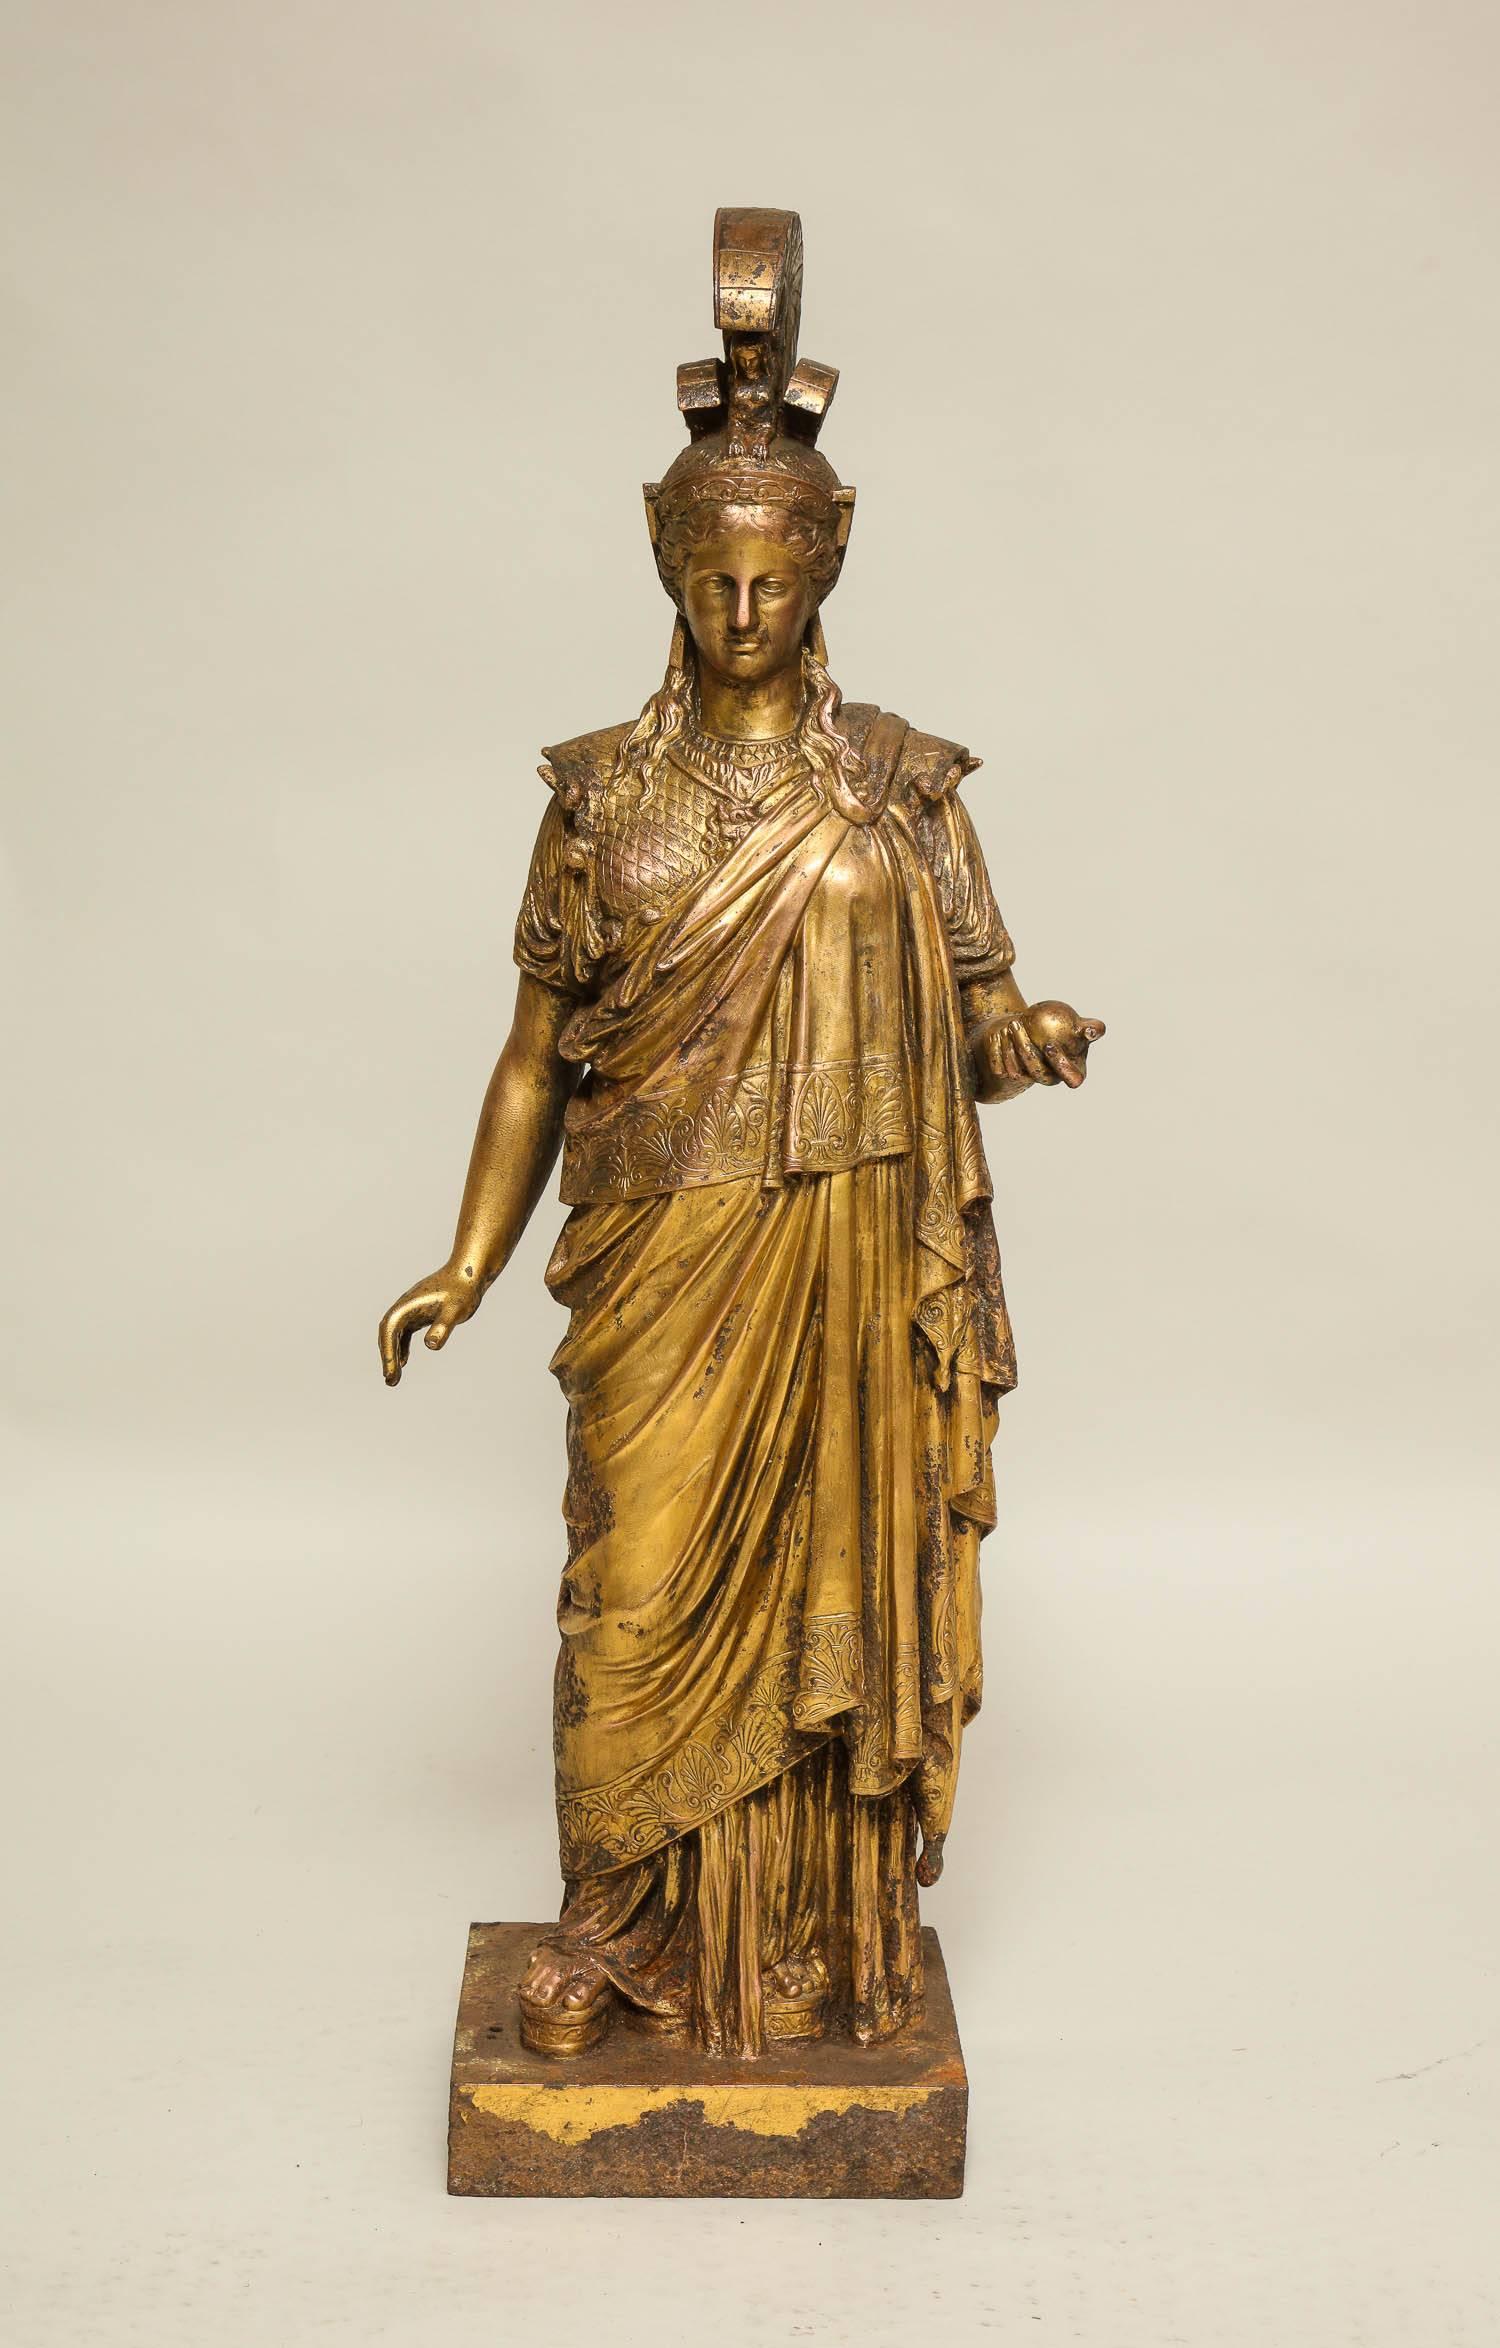 Very fine neoclassical gilt cast iron sculpture of Athena, similar to an example outside Vienna's Palace of Justice, but most unusually cast in very finely detailed cast iron, then copper plated and finally gilded. The surface pitted from use